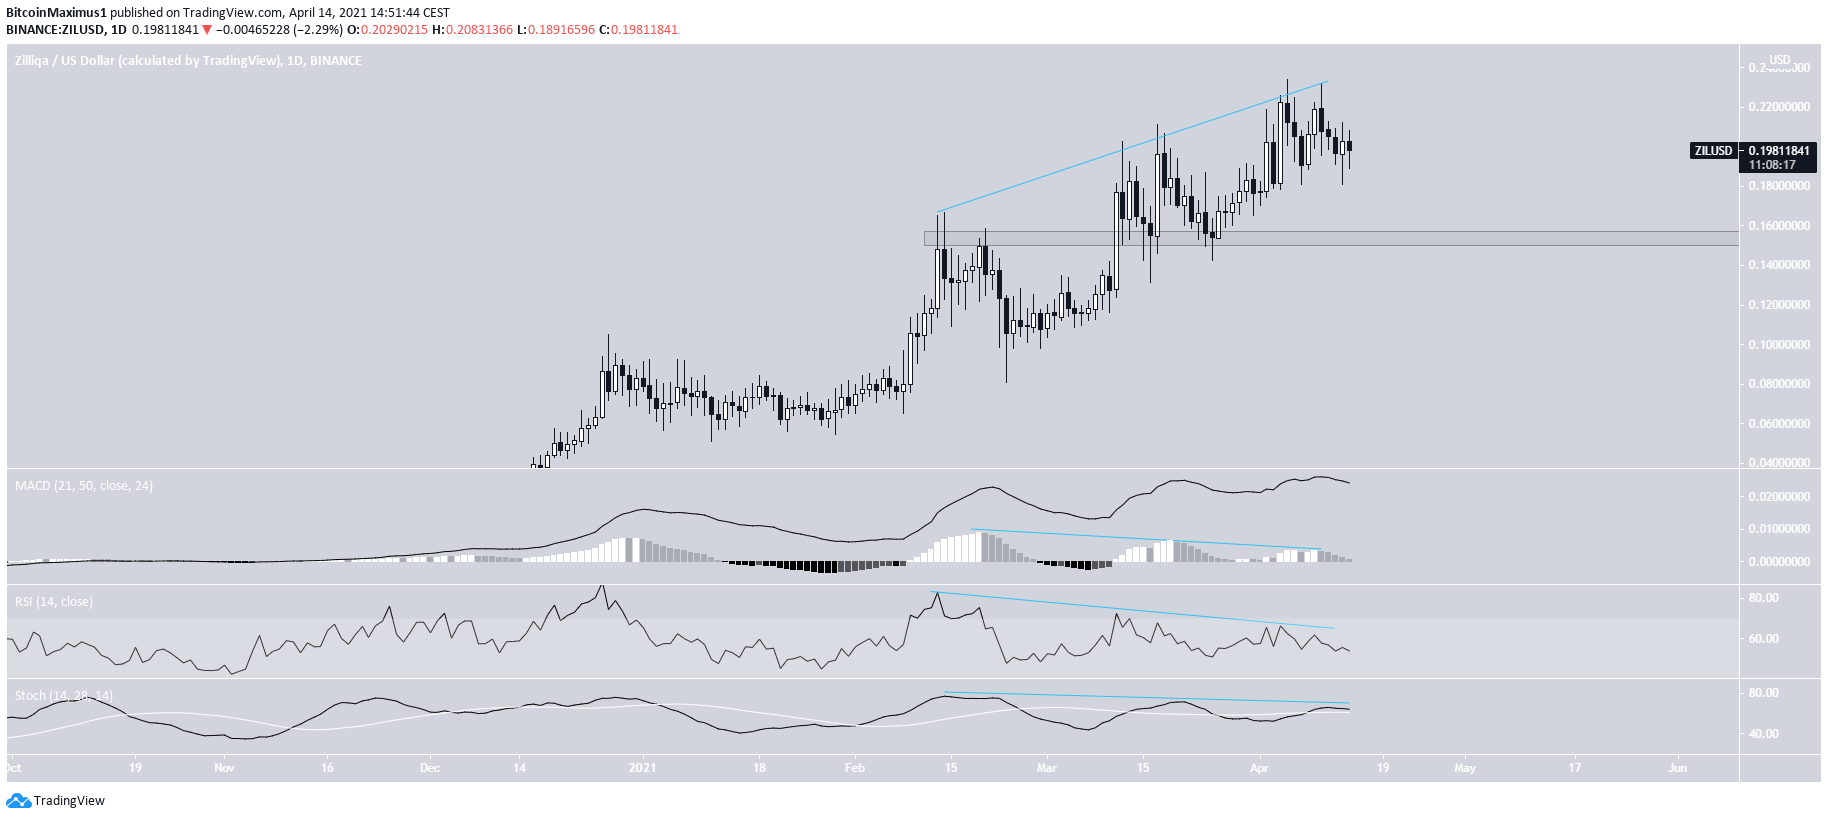 ZIL Daily Movement